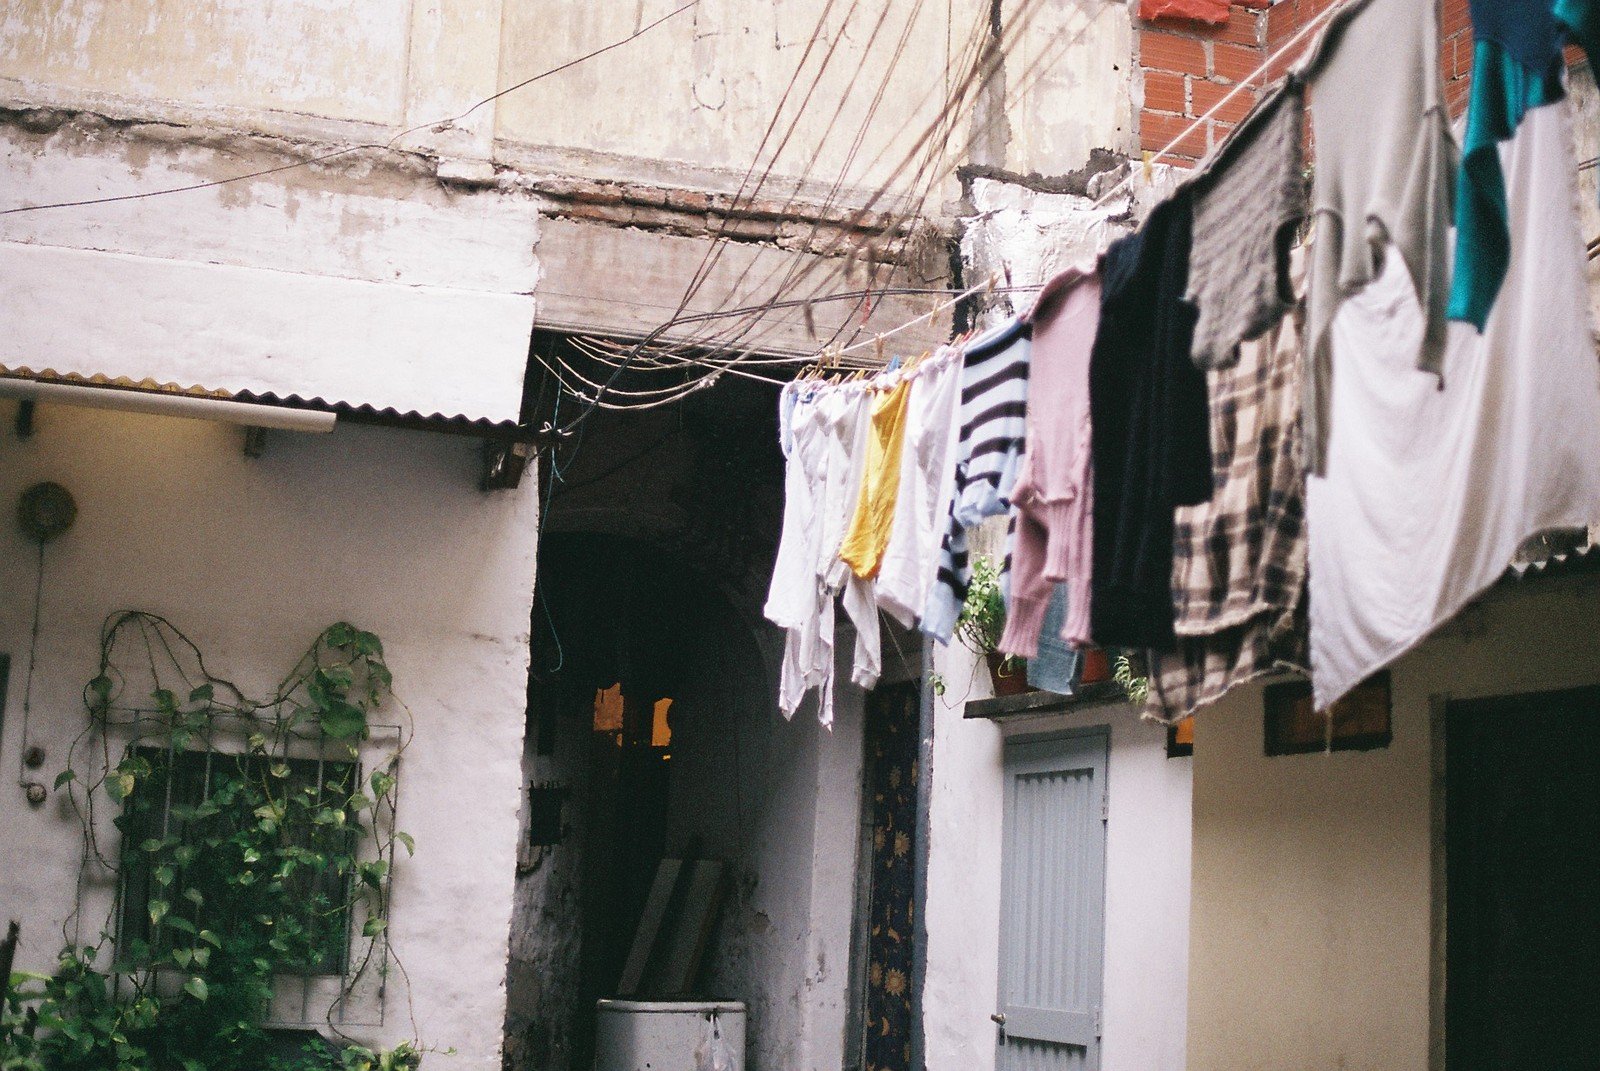 laundry line hanging over building and door area with green house